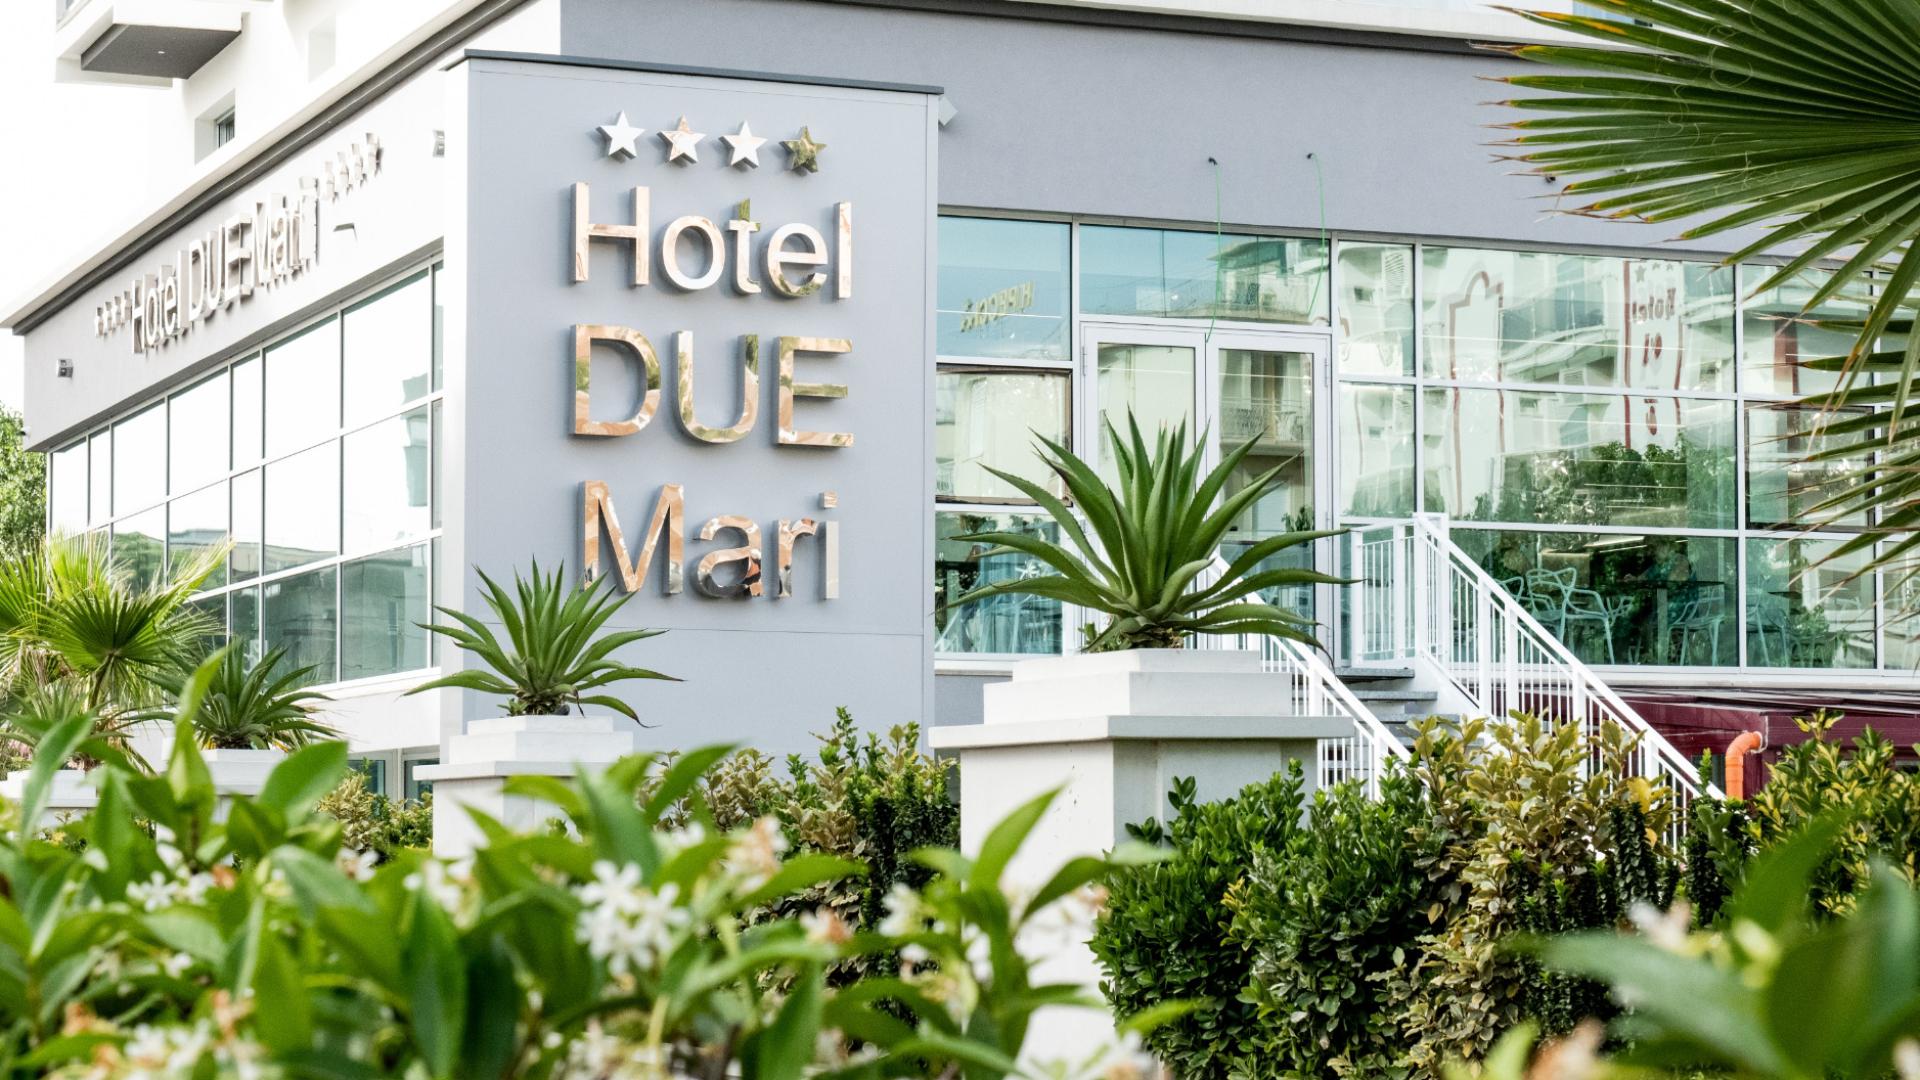 hotelduemari en en-offer-for-the-espn-conference-in-rimini-at-the-palacongressi-in-4-star-hotel-facing-the-sea 018